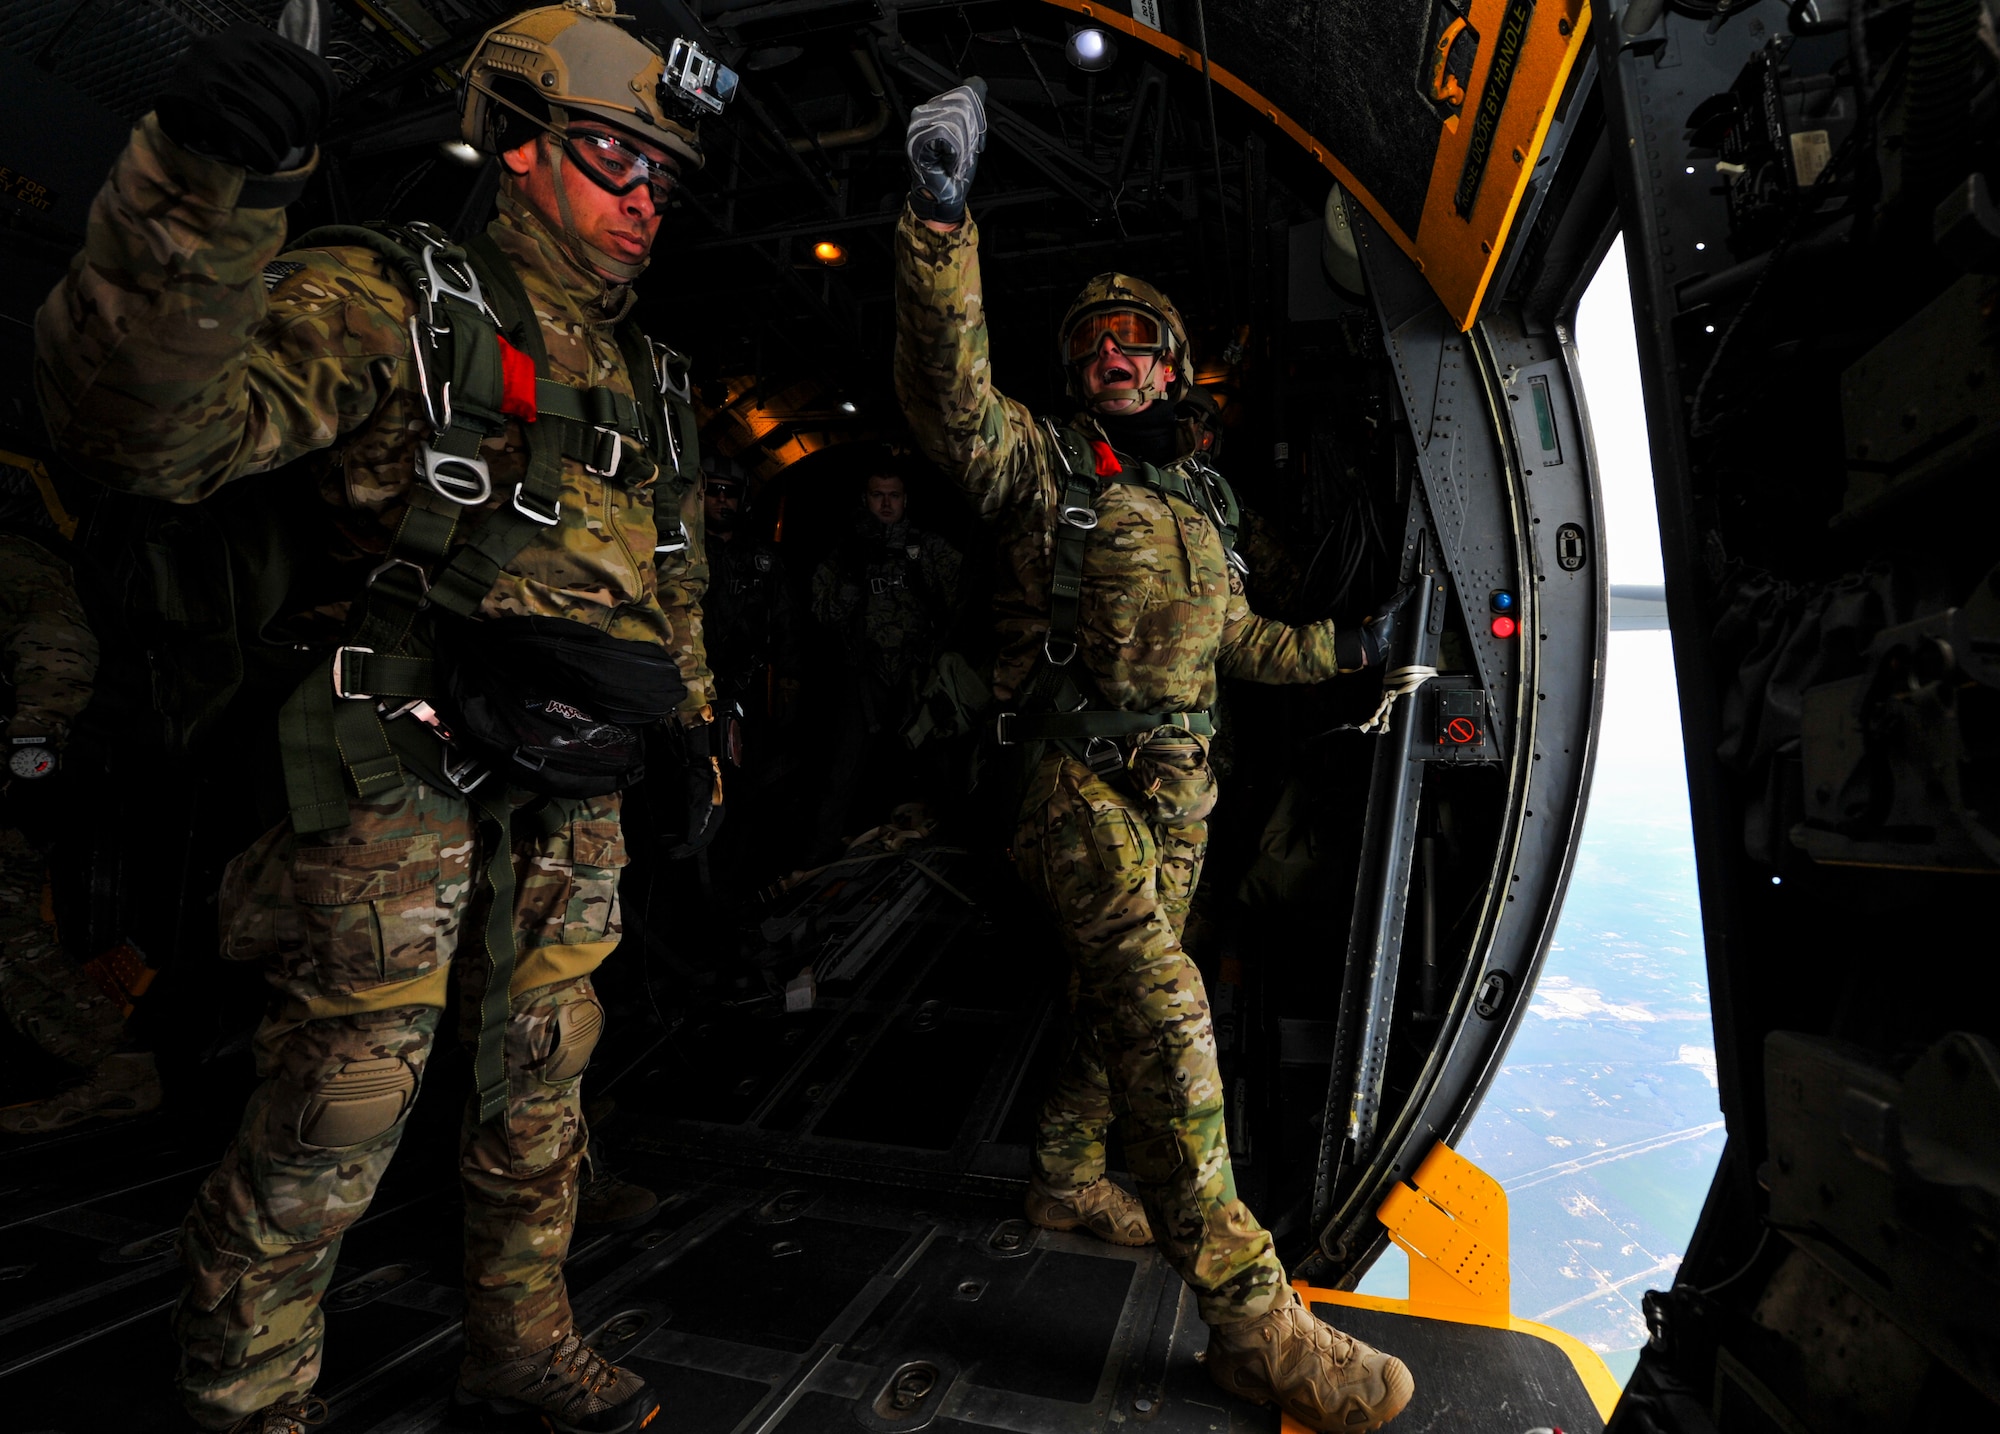 Special Tactics Airmen from the 24th Special Operations Wing prepare to jump out of an MC-130H Talon II at Hurlburt Field, Fla., Jan. 7, 2014. A group of 16 members teamed up with a MC-130H Talon II crew to jump from 10,000 feet to train for alternate insertion into hostile or austere environments. (U.S. Air Force photo/Senior Airman Christopher Callaway)